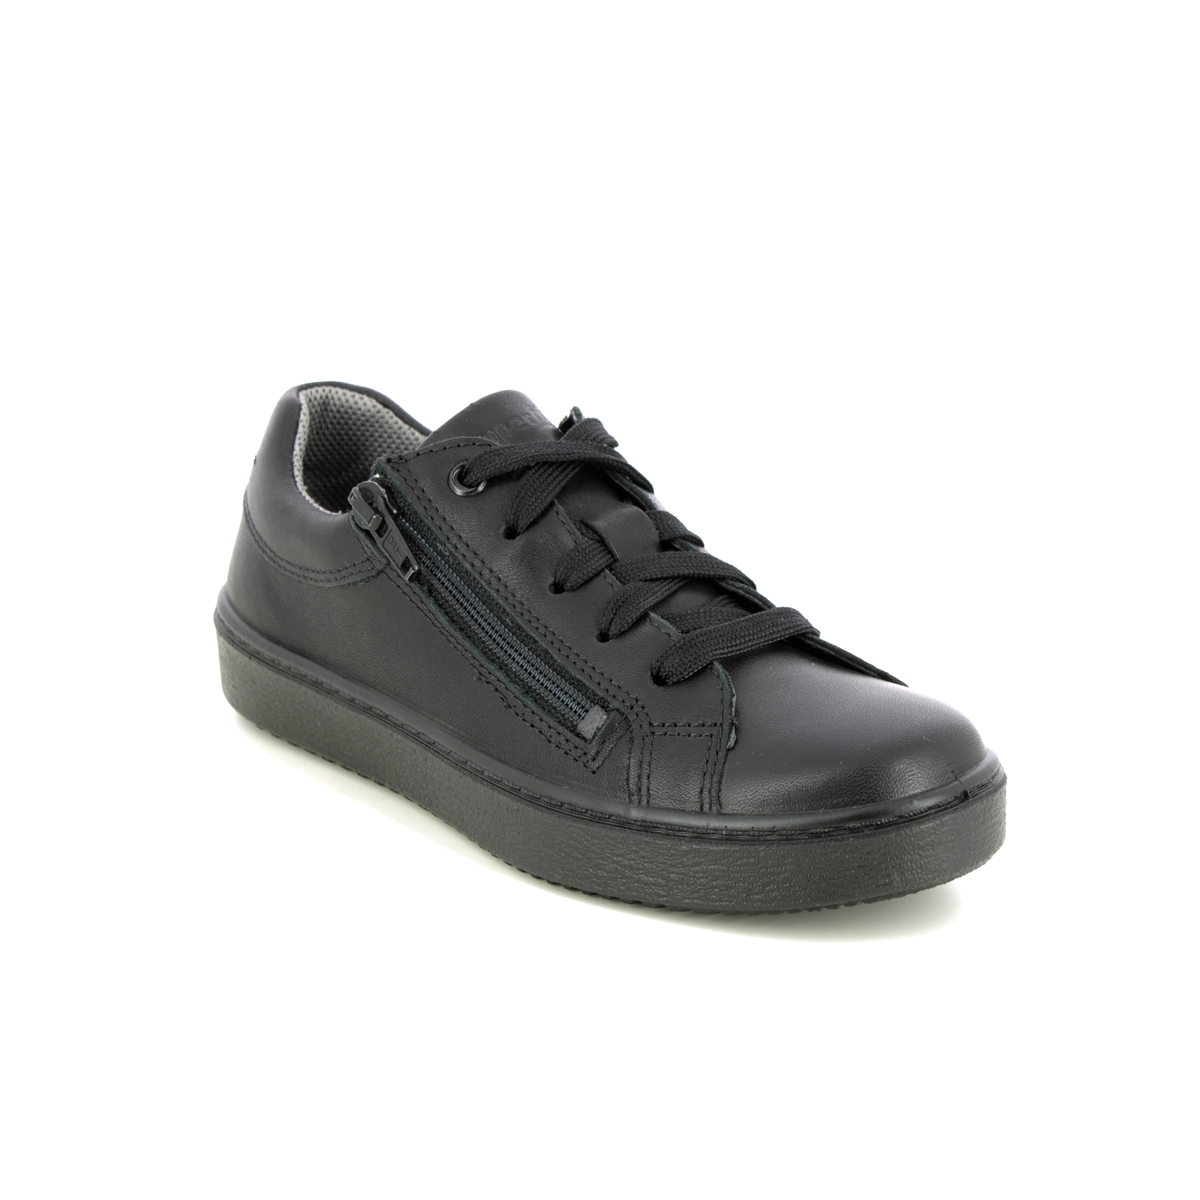 Superfit Heaven Zip Lace Black Leather Kids Girls Shoes 1006489-0000 In Size 38 In Plain Black Leather For kids